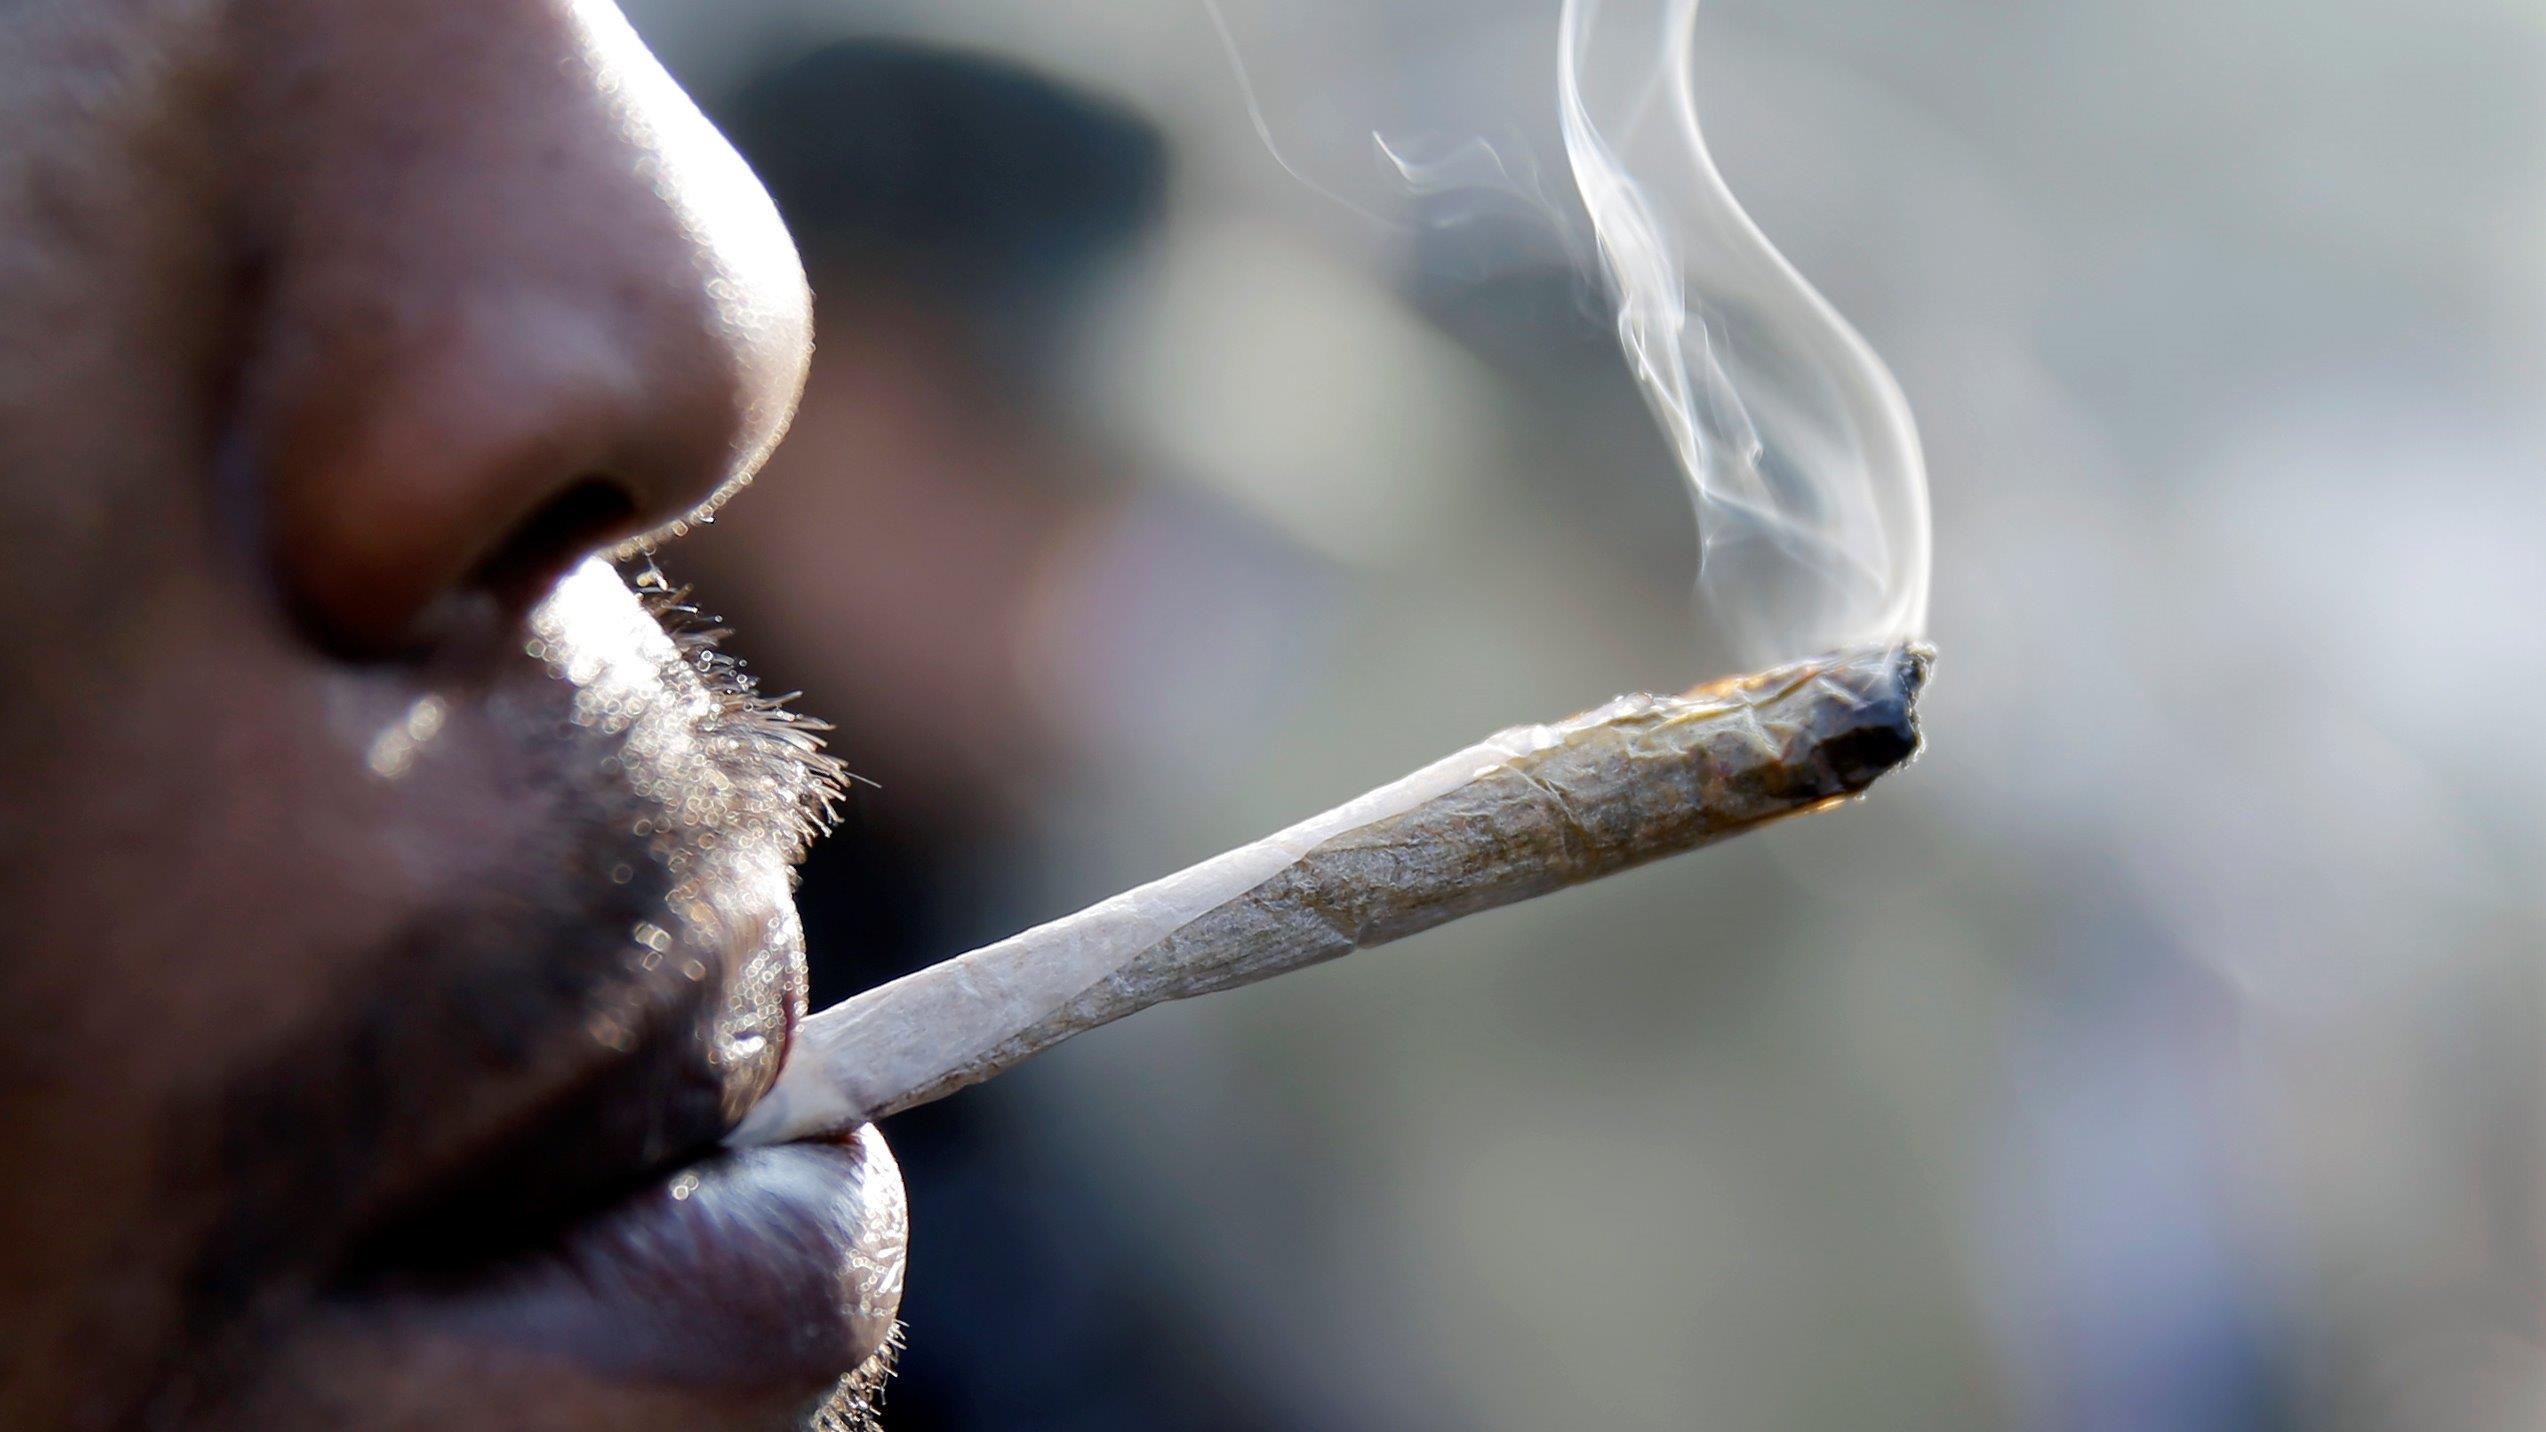 Tech sector developing tools to identify stoned drivers